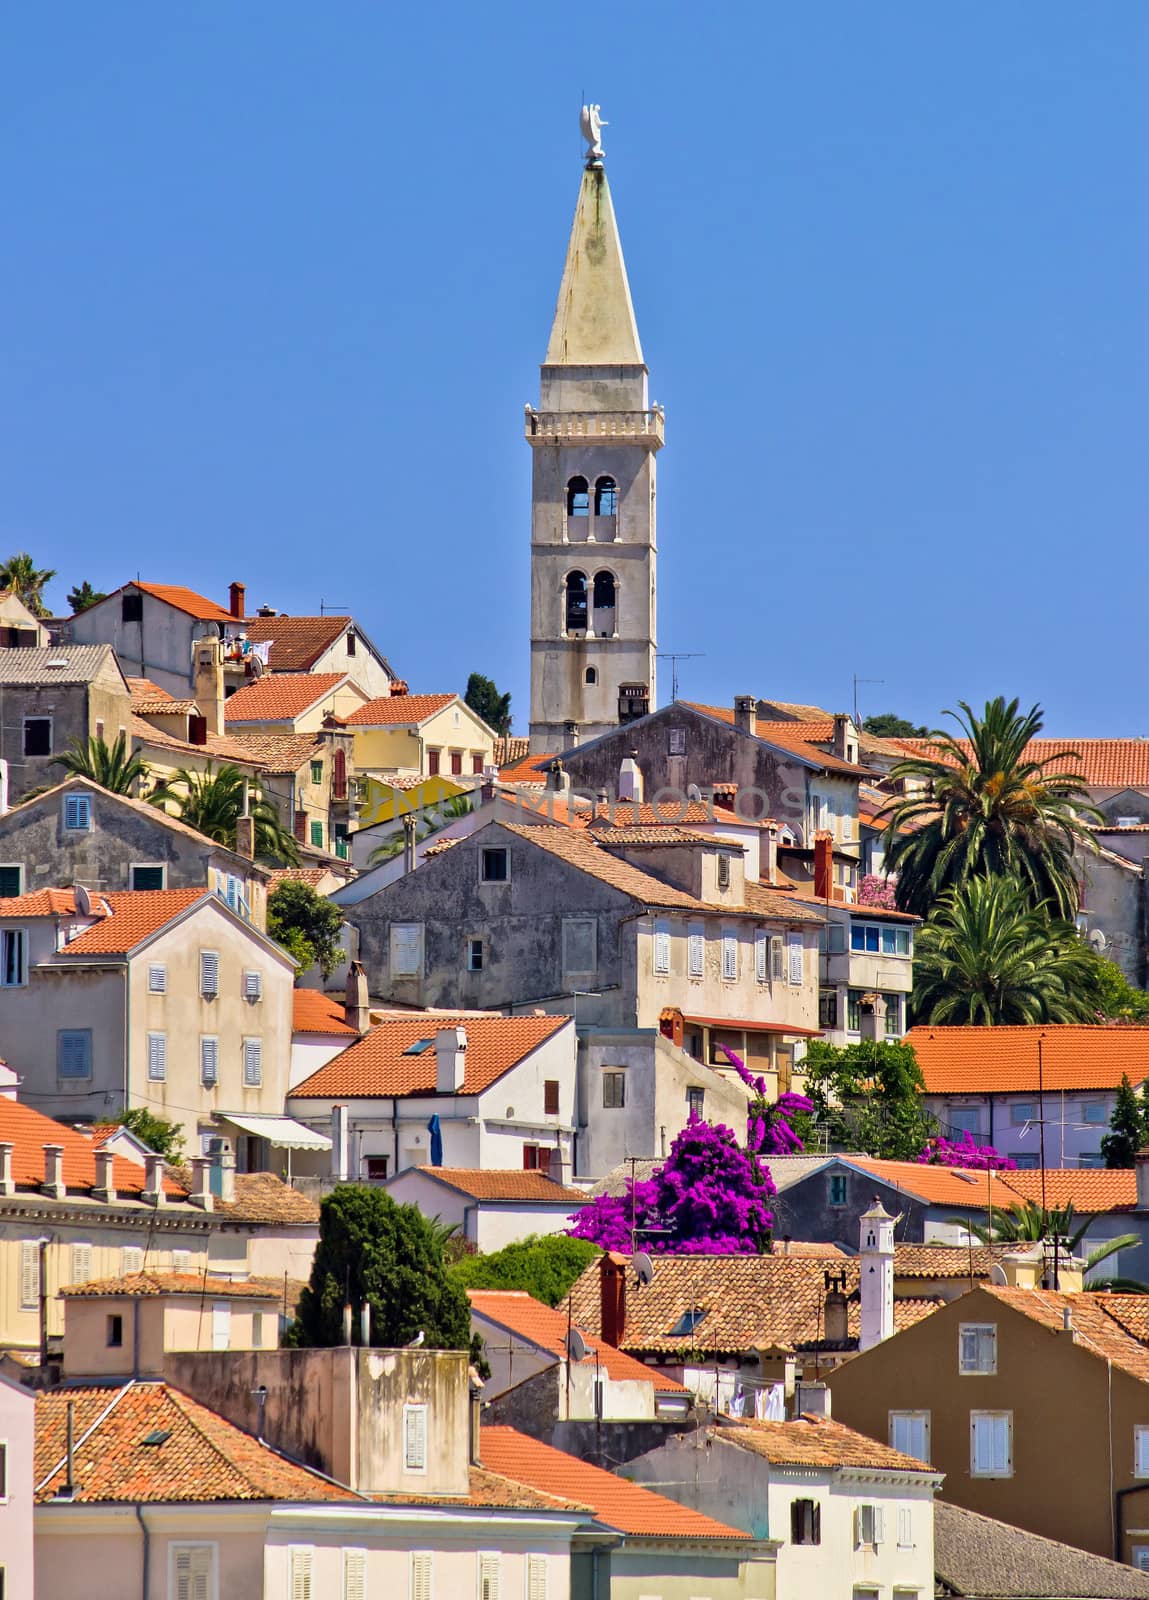 Colorful adriatic town of Losinj by xbrchx